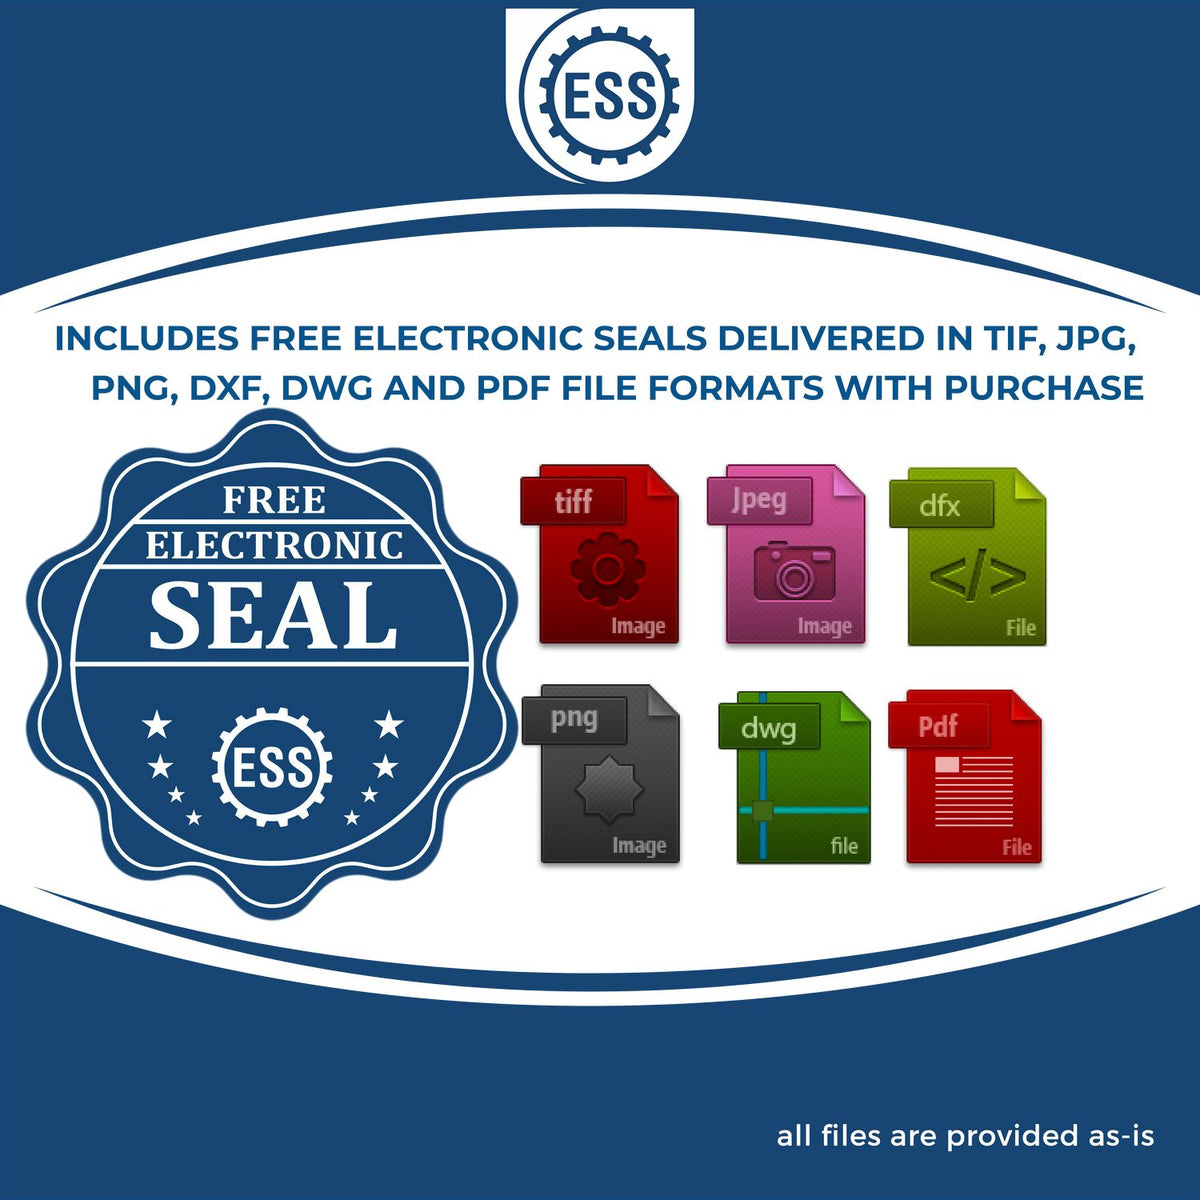 An infographic for the free electronic seal for the Gift Nebraska Land Surveyor Seal illustrating the different file type icons such as DXF, DWG, TIF, JPG and PNG.